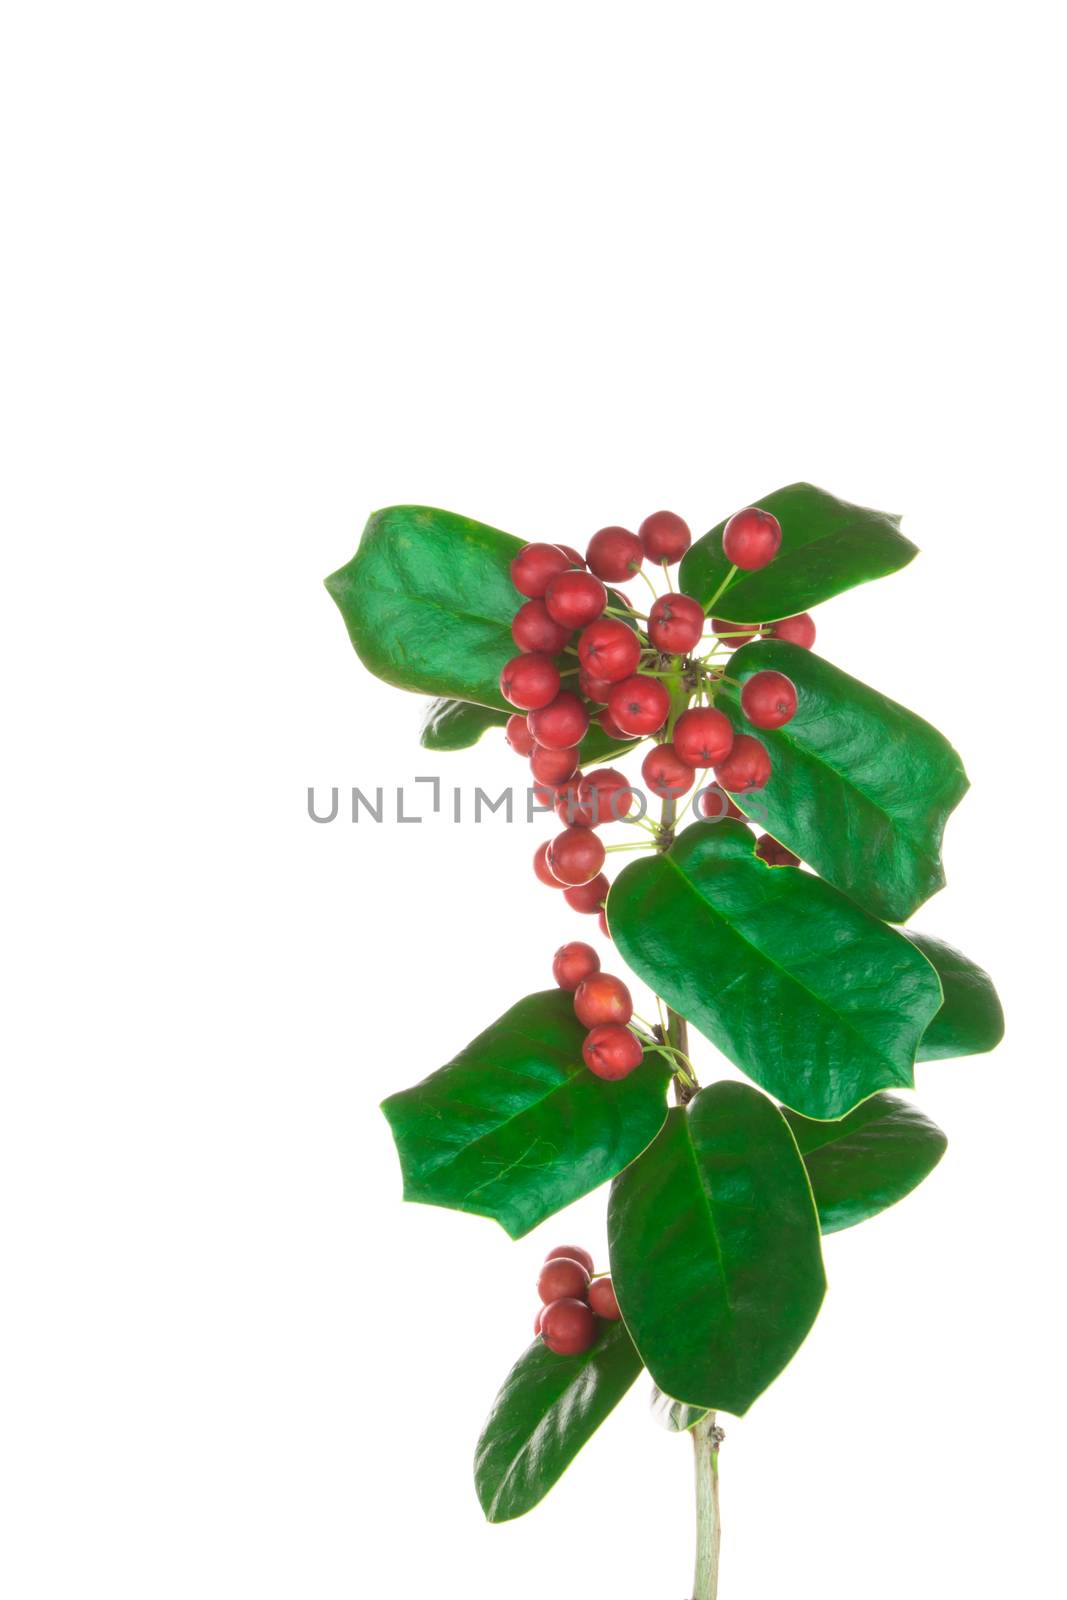 Christmas Border of holly on white by wyoosumran